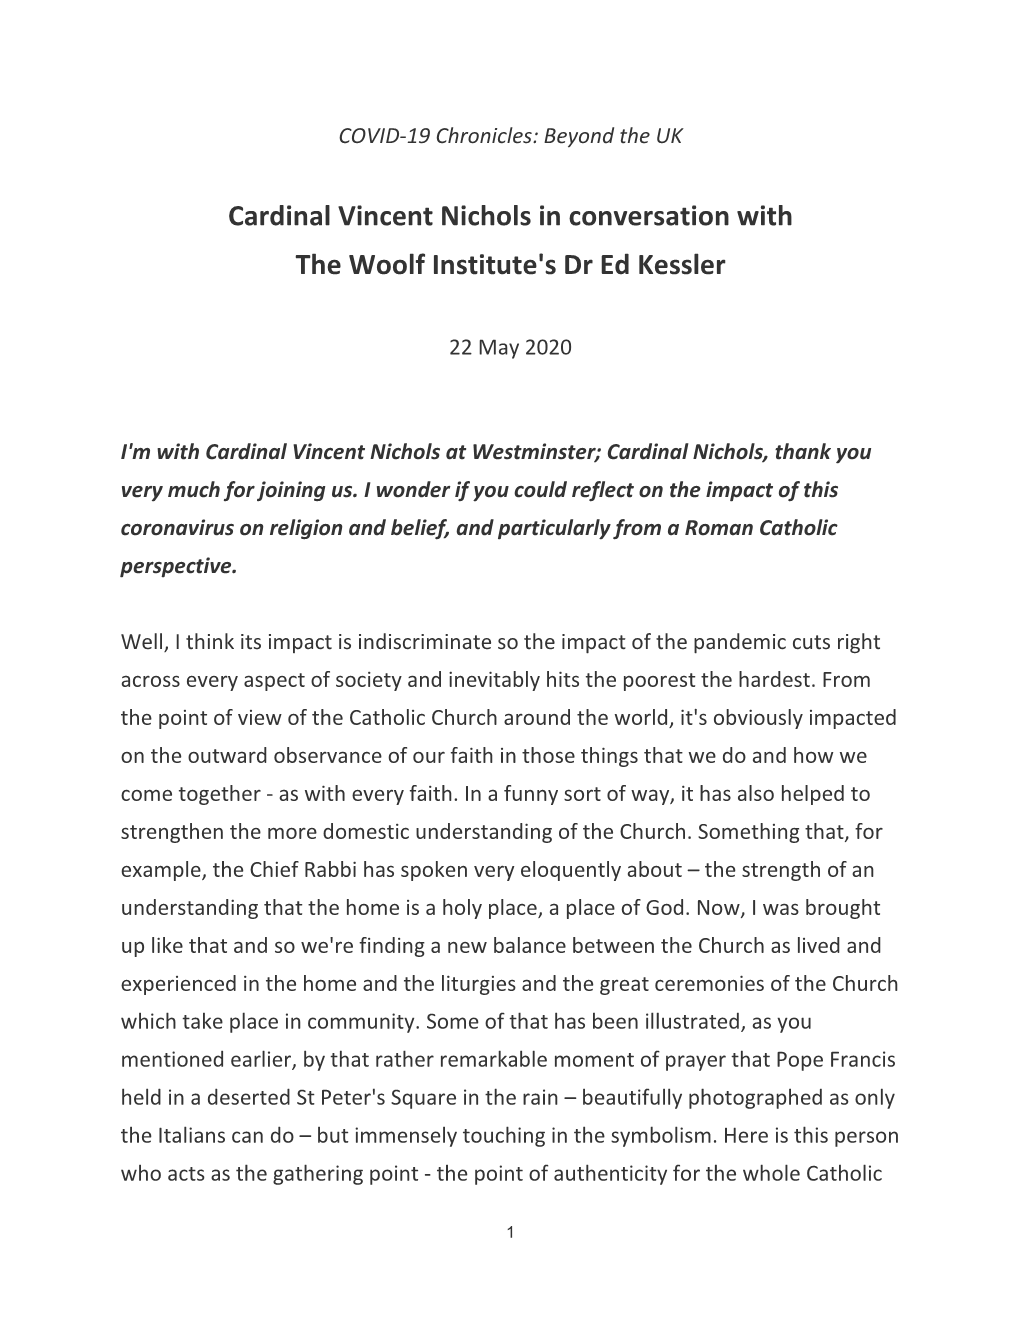 Cardinal Vincent Nichols in Conversation with the Woolf Institute's Dr Ed Kessler